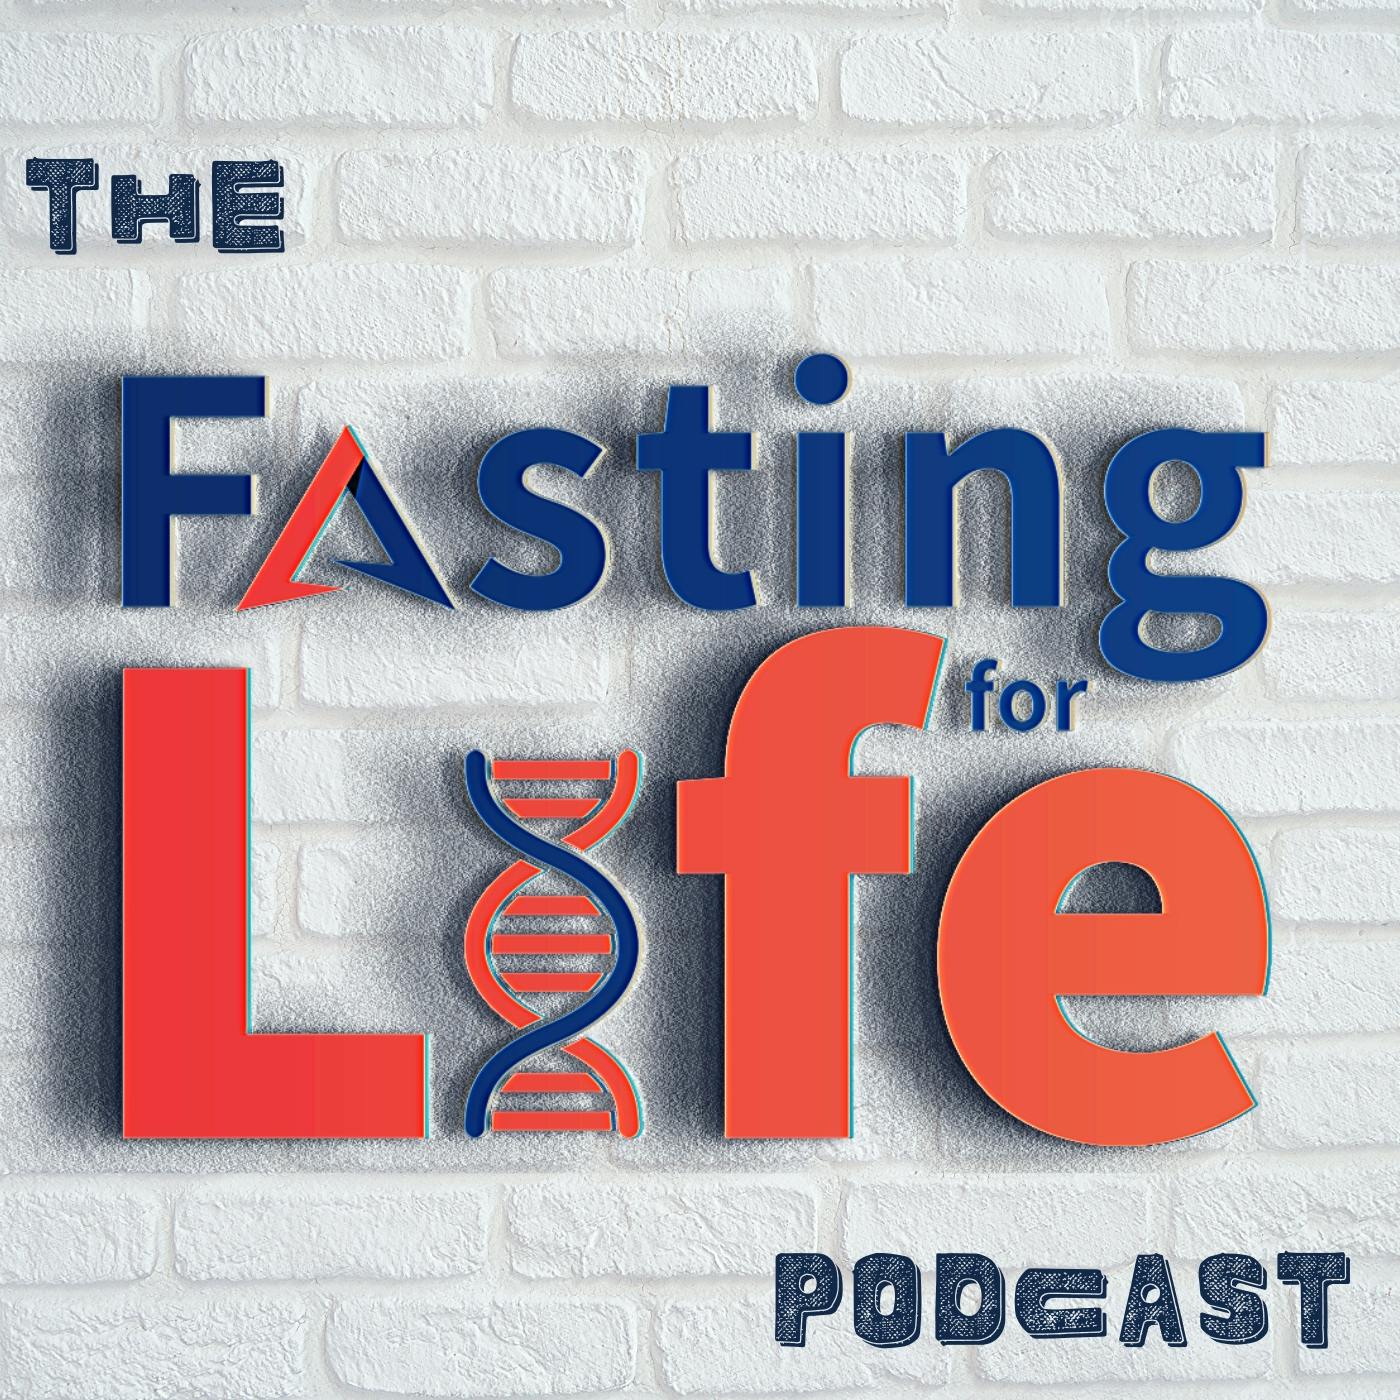 Ep. 193 - Make fasting easier by controlling blood sugar volatility & cravings | Common signs of metabolic dysfunction & how to improve them | How important are blood sugar & HbA1c for health & fat lo